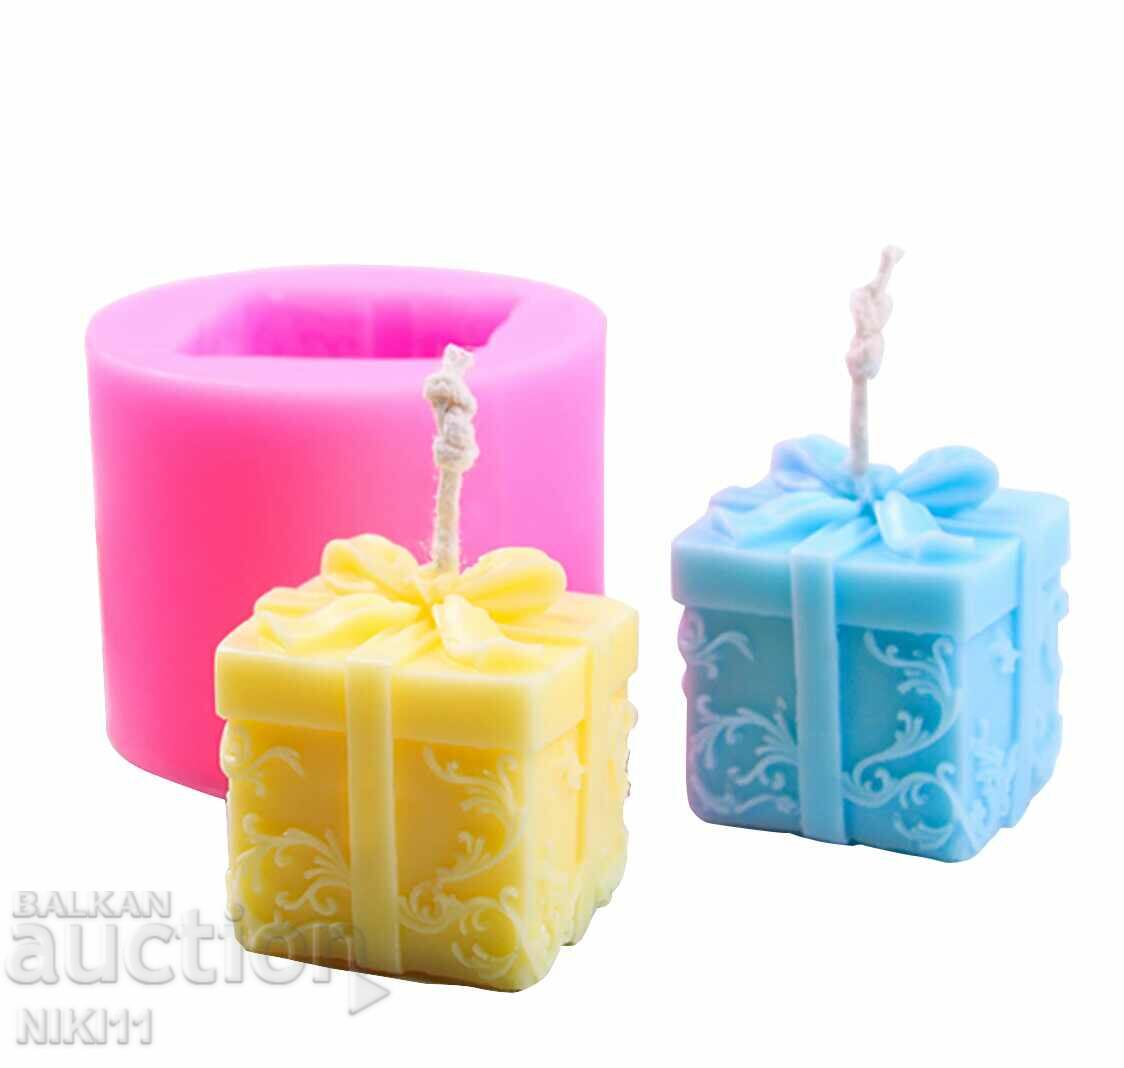 silicone gift mold for candles, fondant